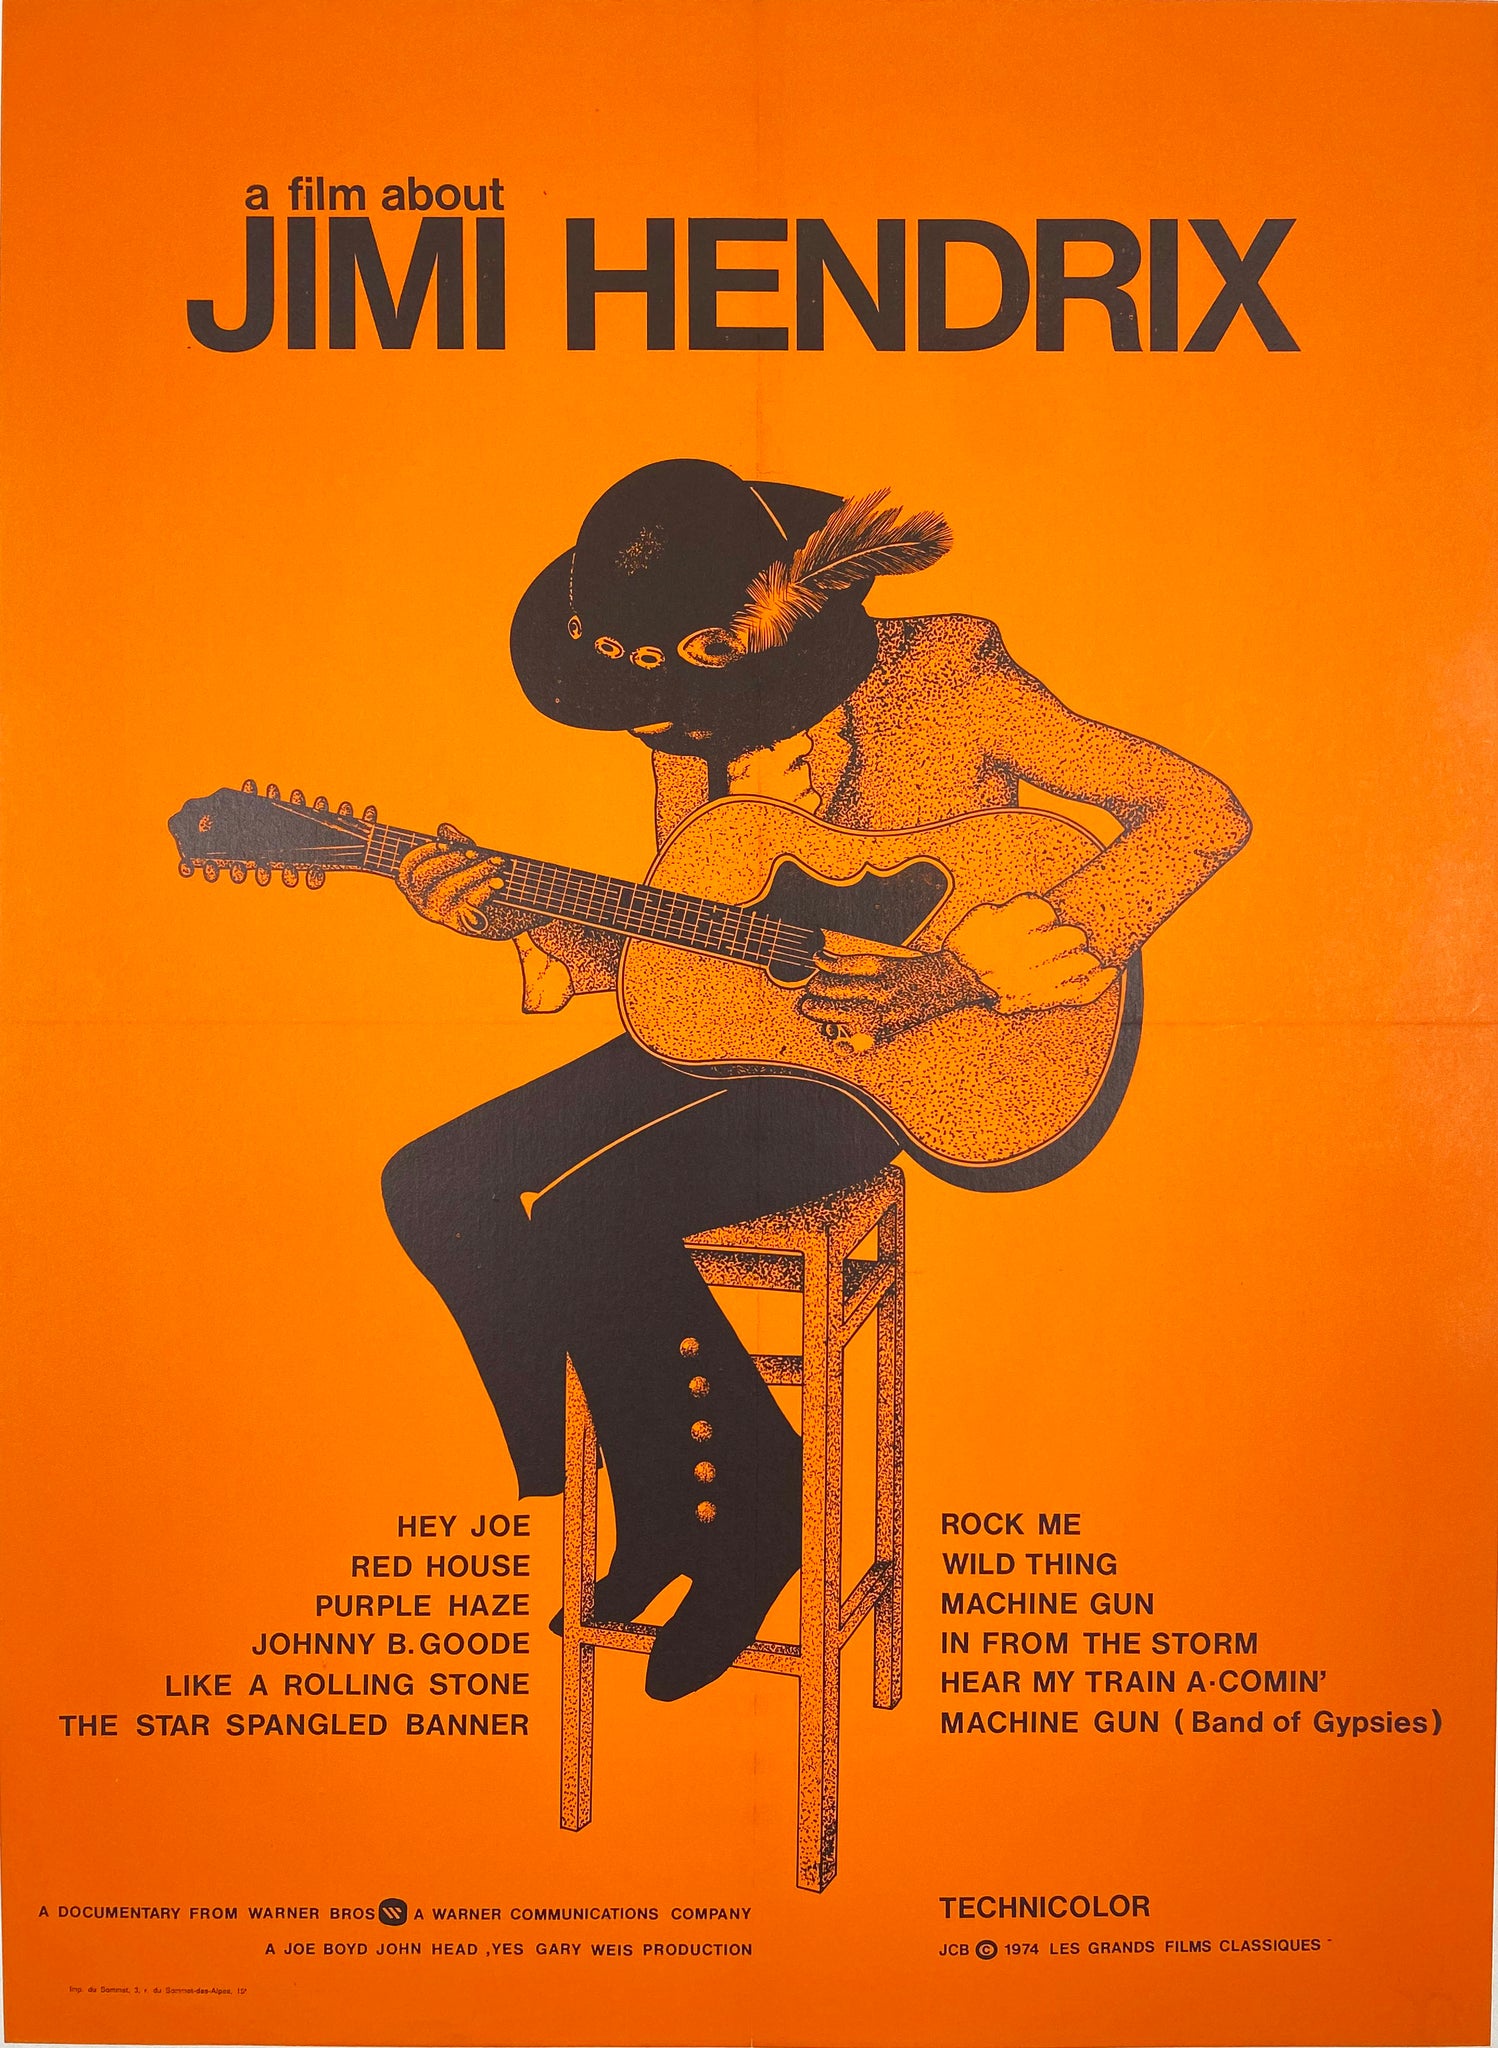 A Film About Jimi Hendrix - Vintage Film Poster 1974